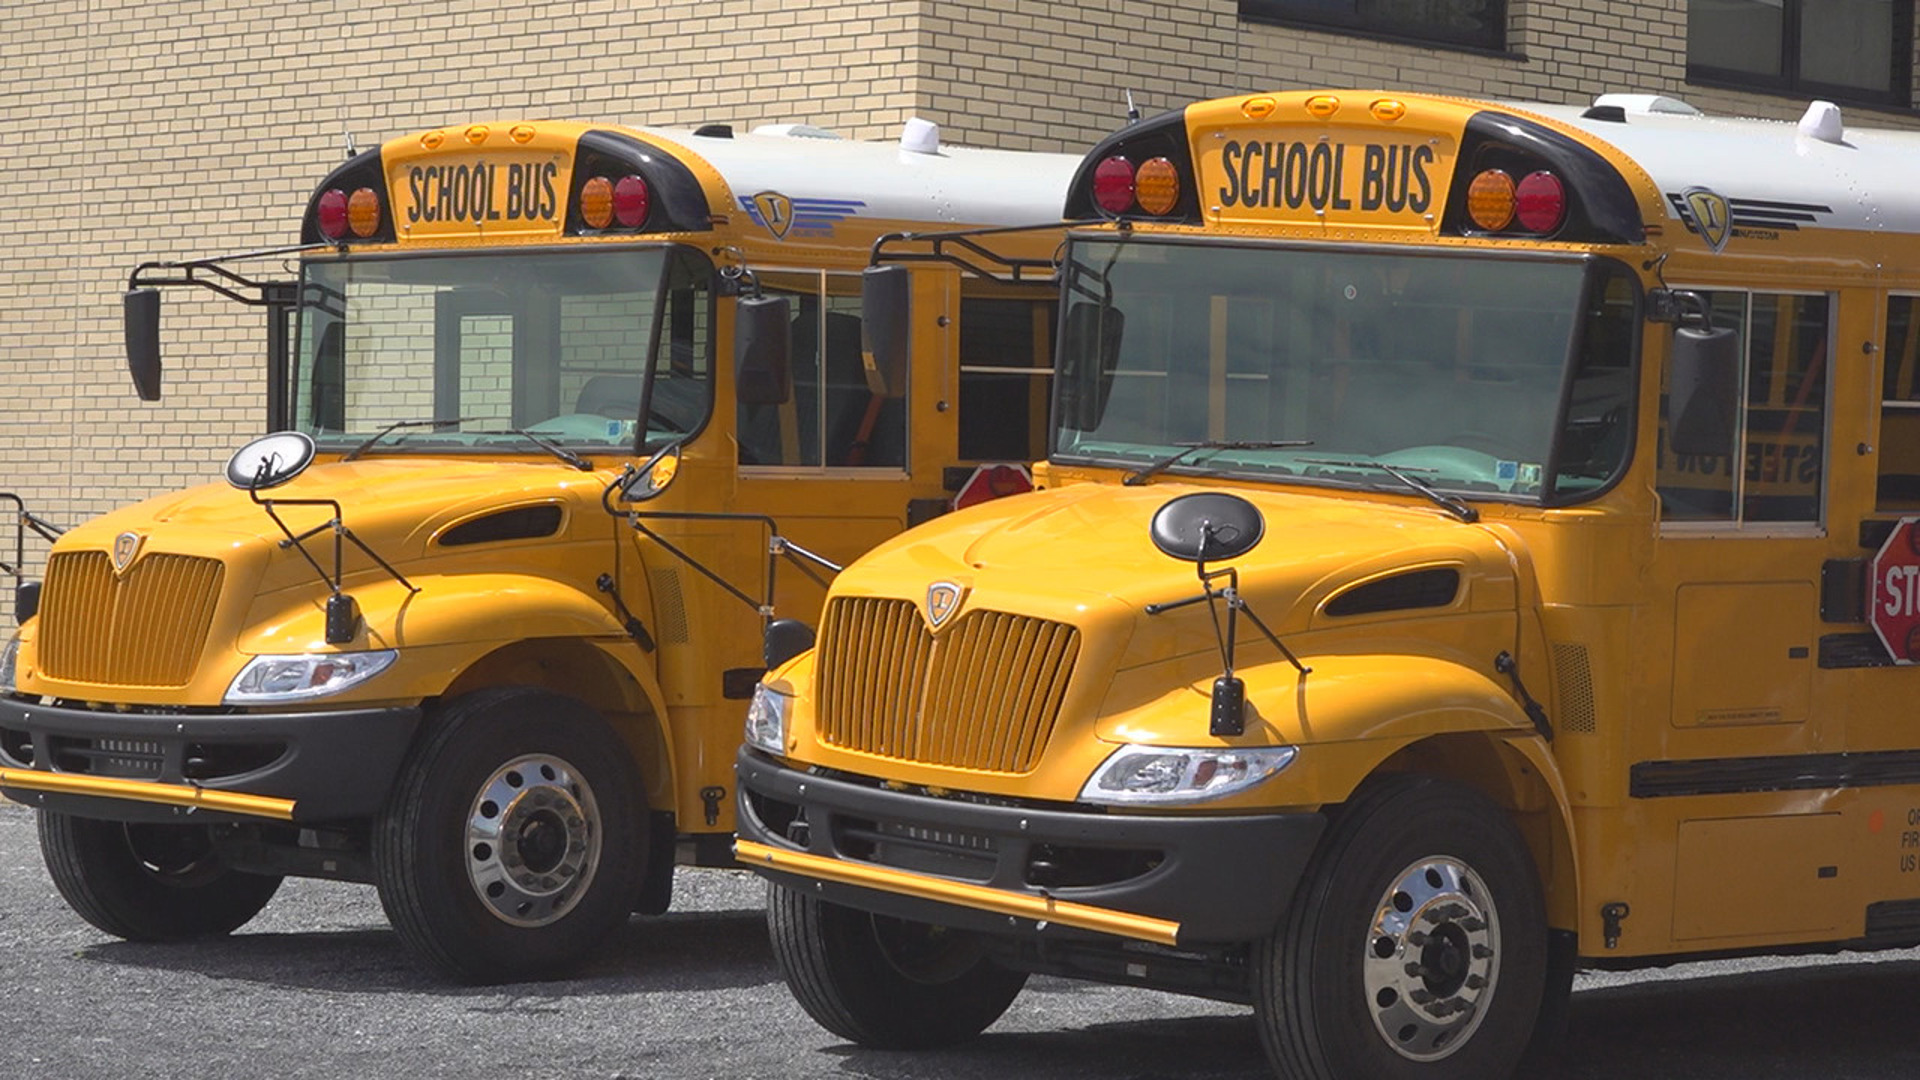 Steelton Highspire School District purchased six new electric buses through a $2.7M federal grant. They are the first in Pennsylvania to have an electric bus fleet.